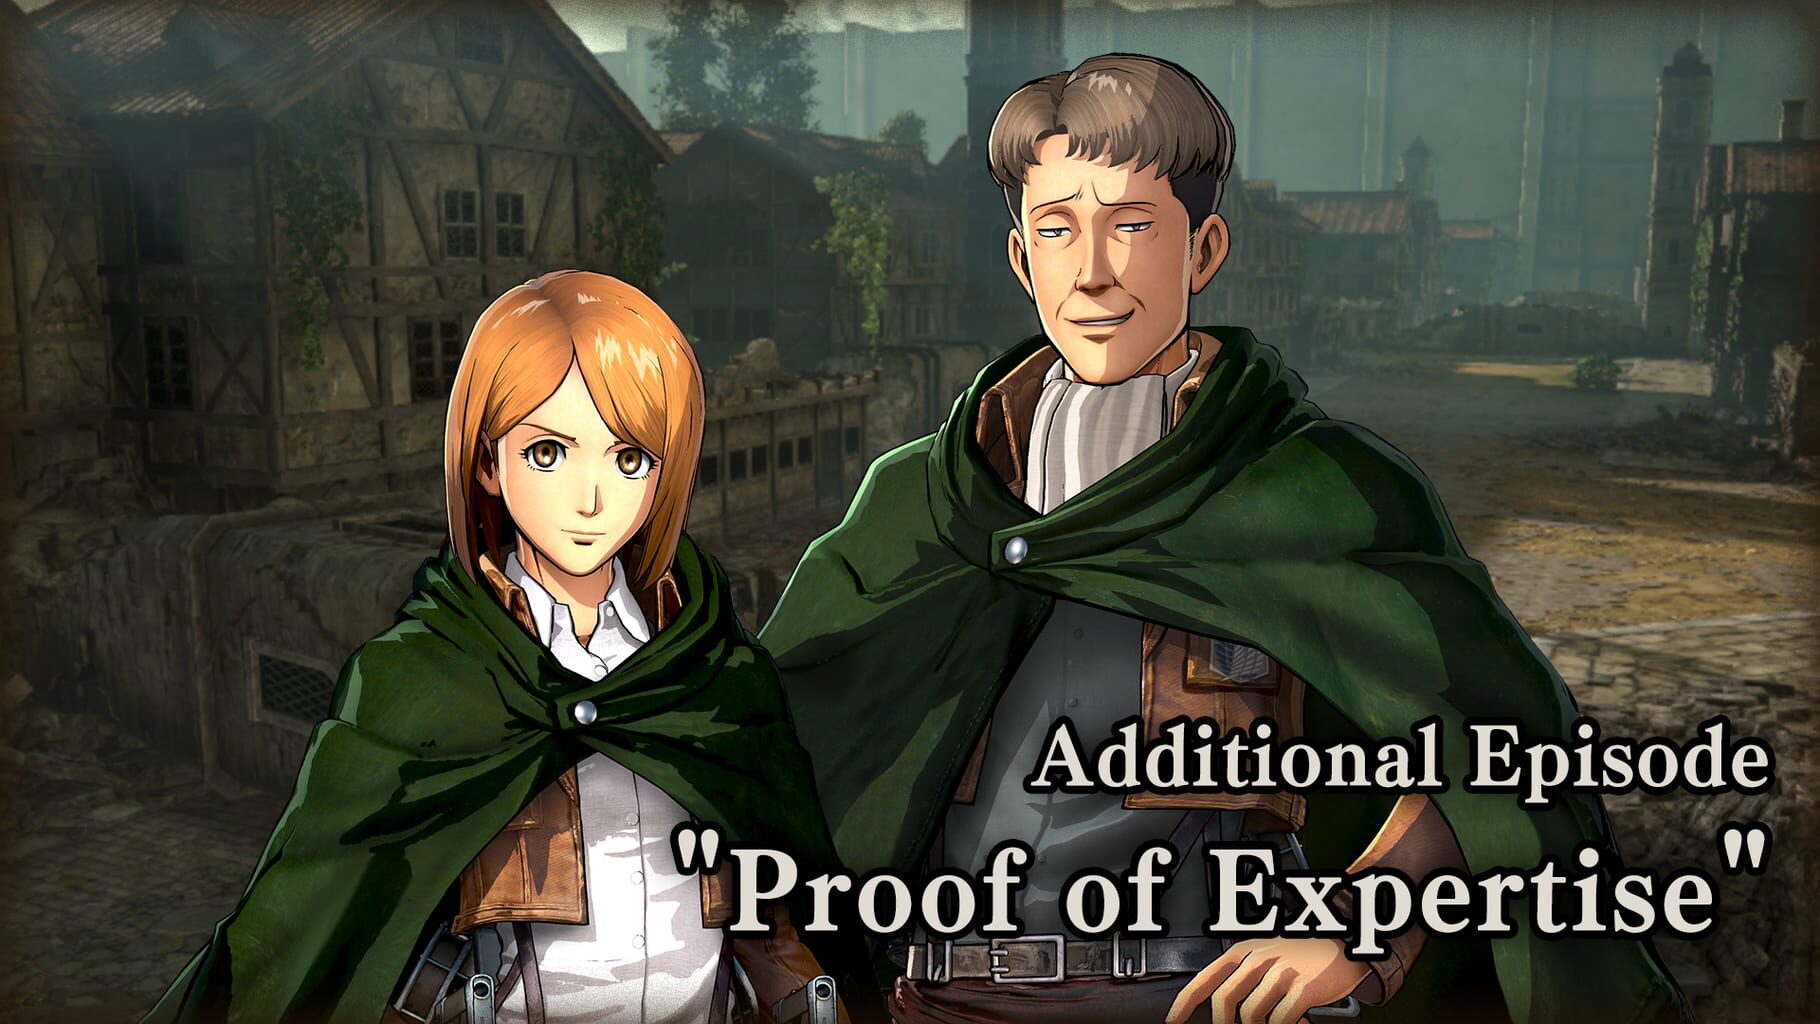 Attack on Titan 2: Proof of Expertise artwork